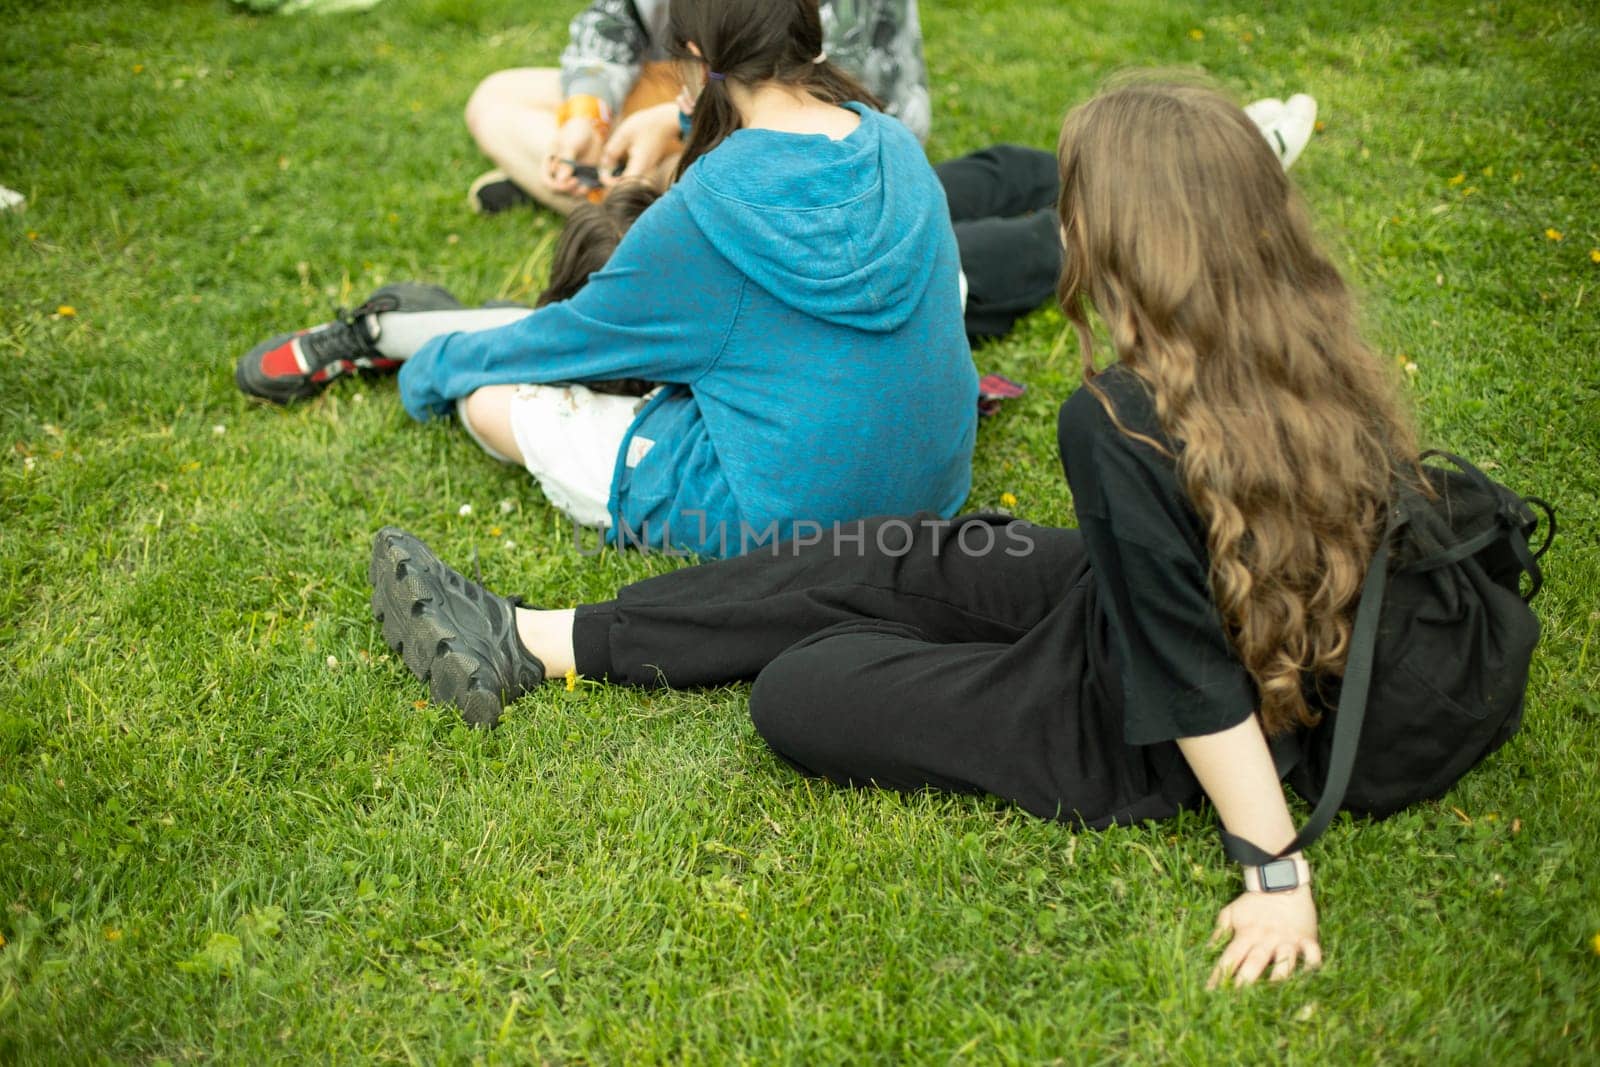 Children in summer relax on green grass. Girls in park. Relax on hot day.